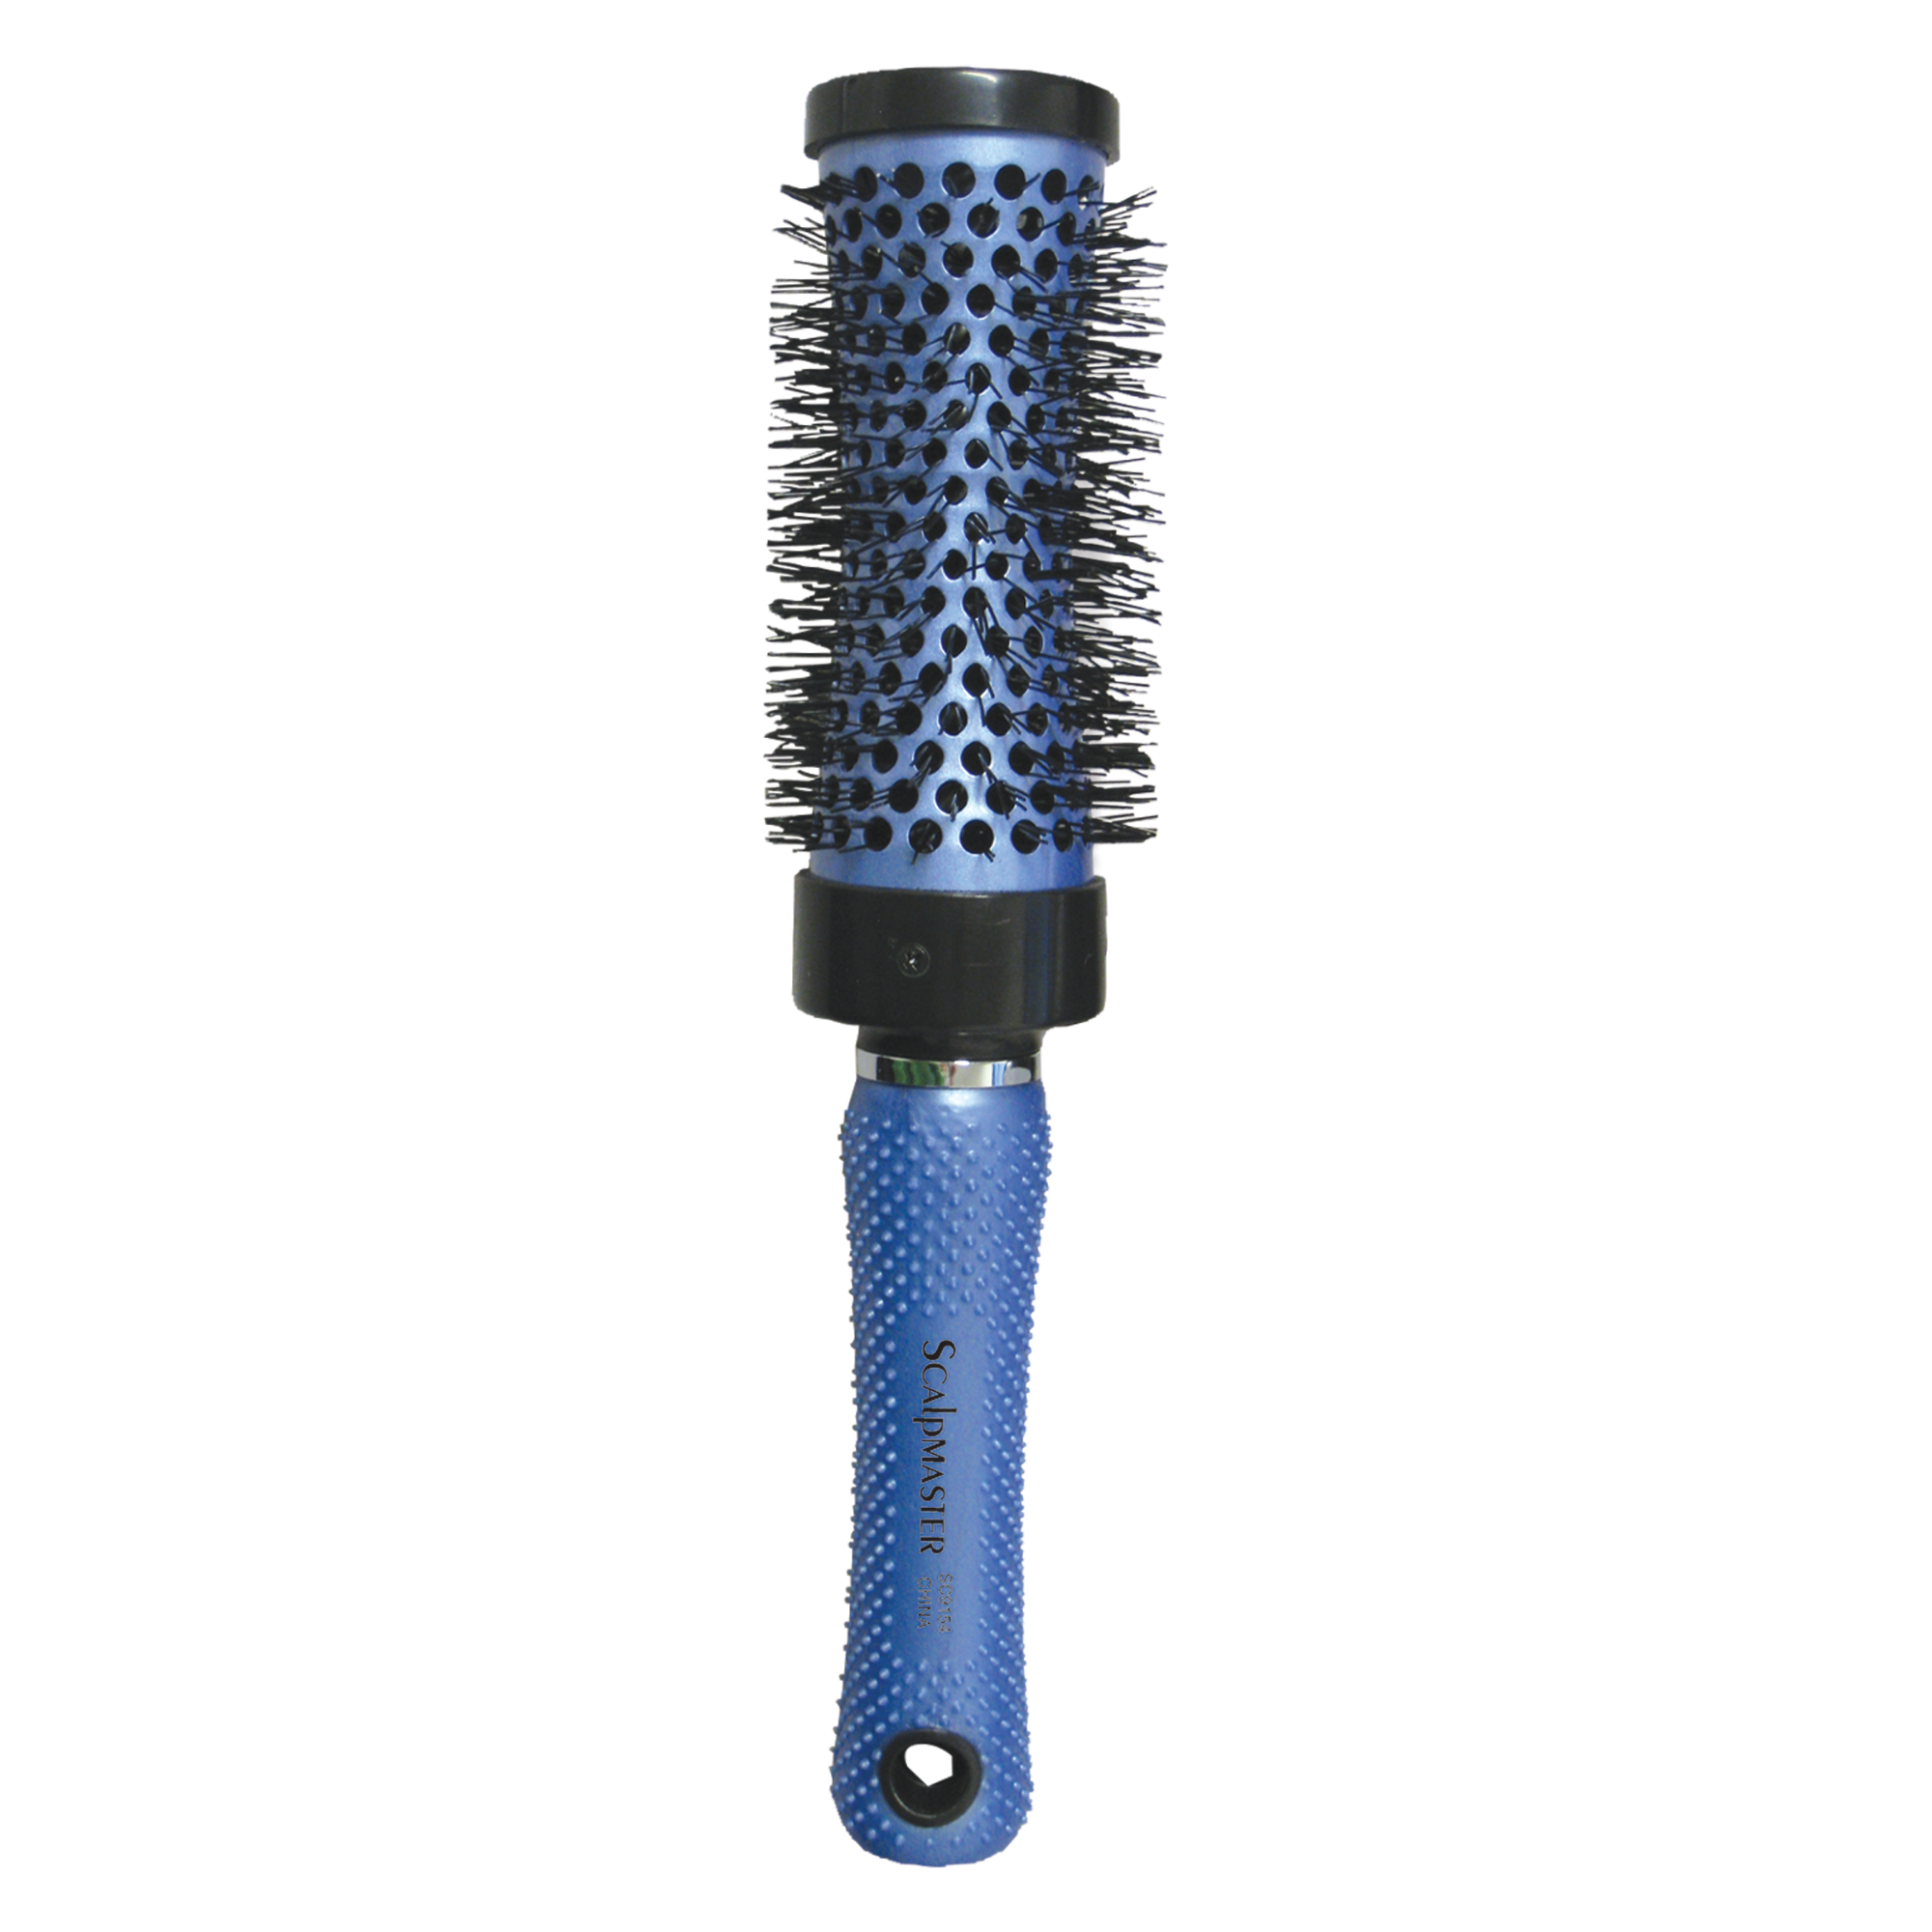 Concave Thermal Brush with Rubber Handle - 1-3/4"